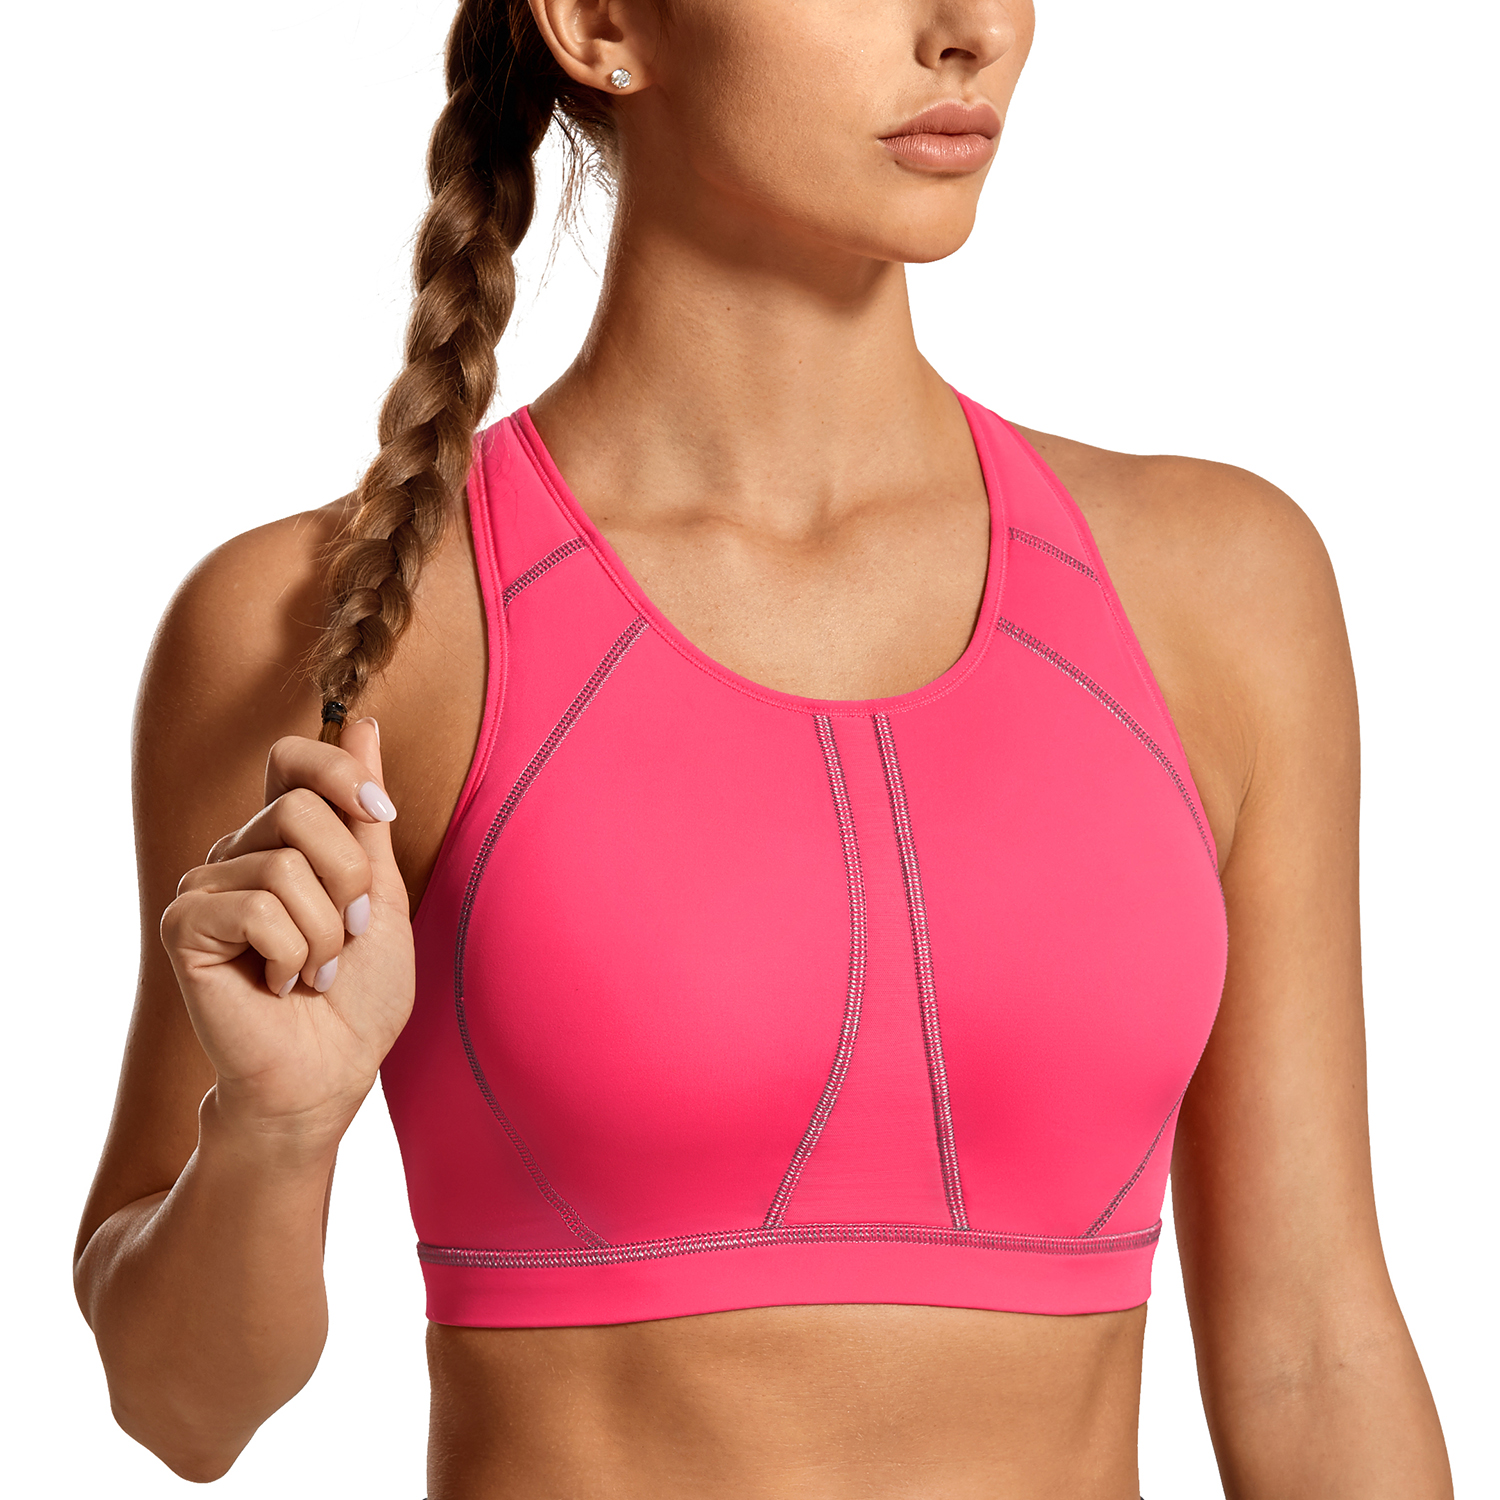 SYROKAN Womens Wire Free No Padding Full Support Plus Size Sports Bra